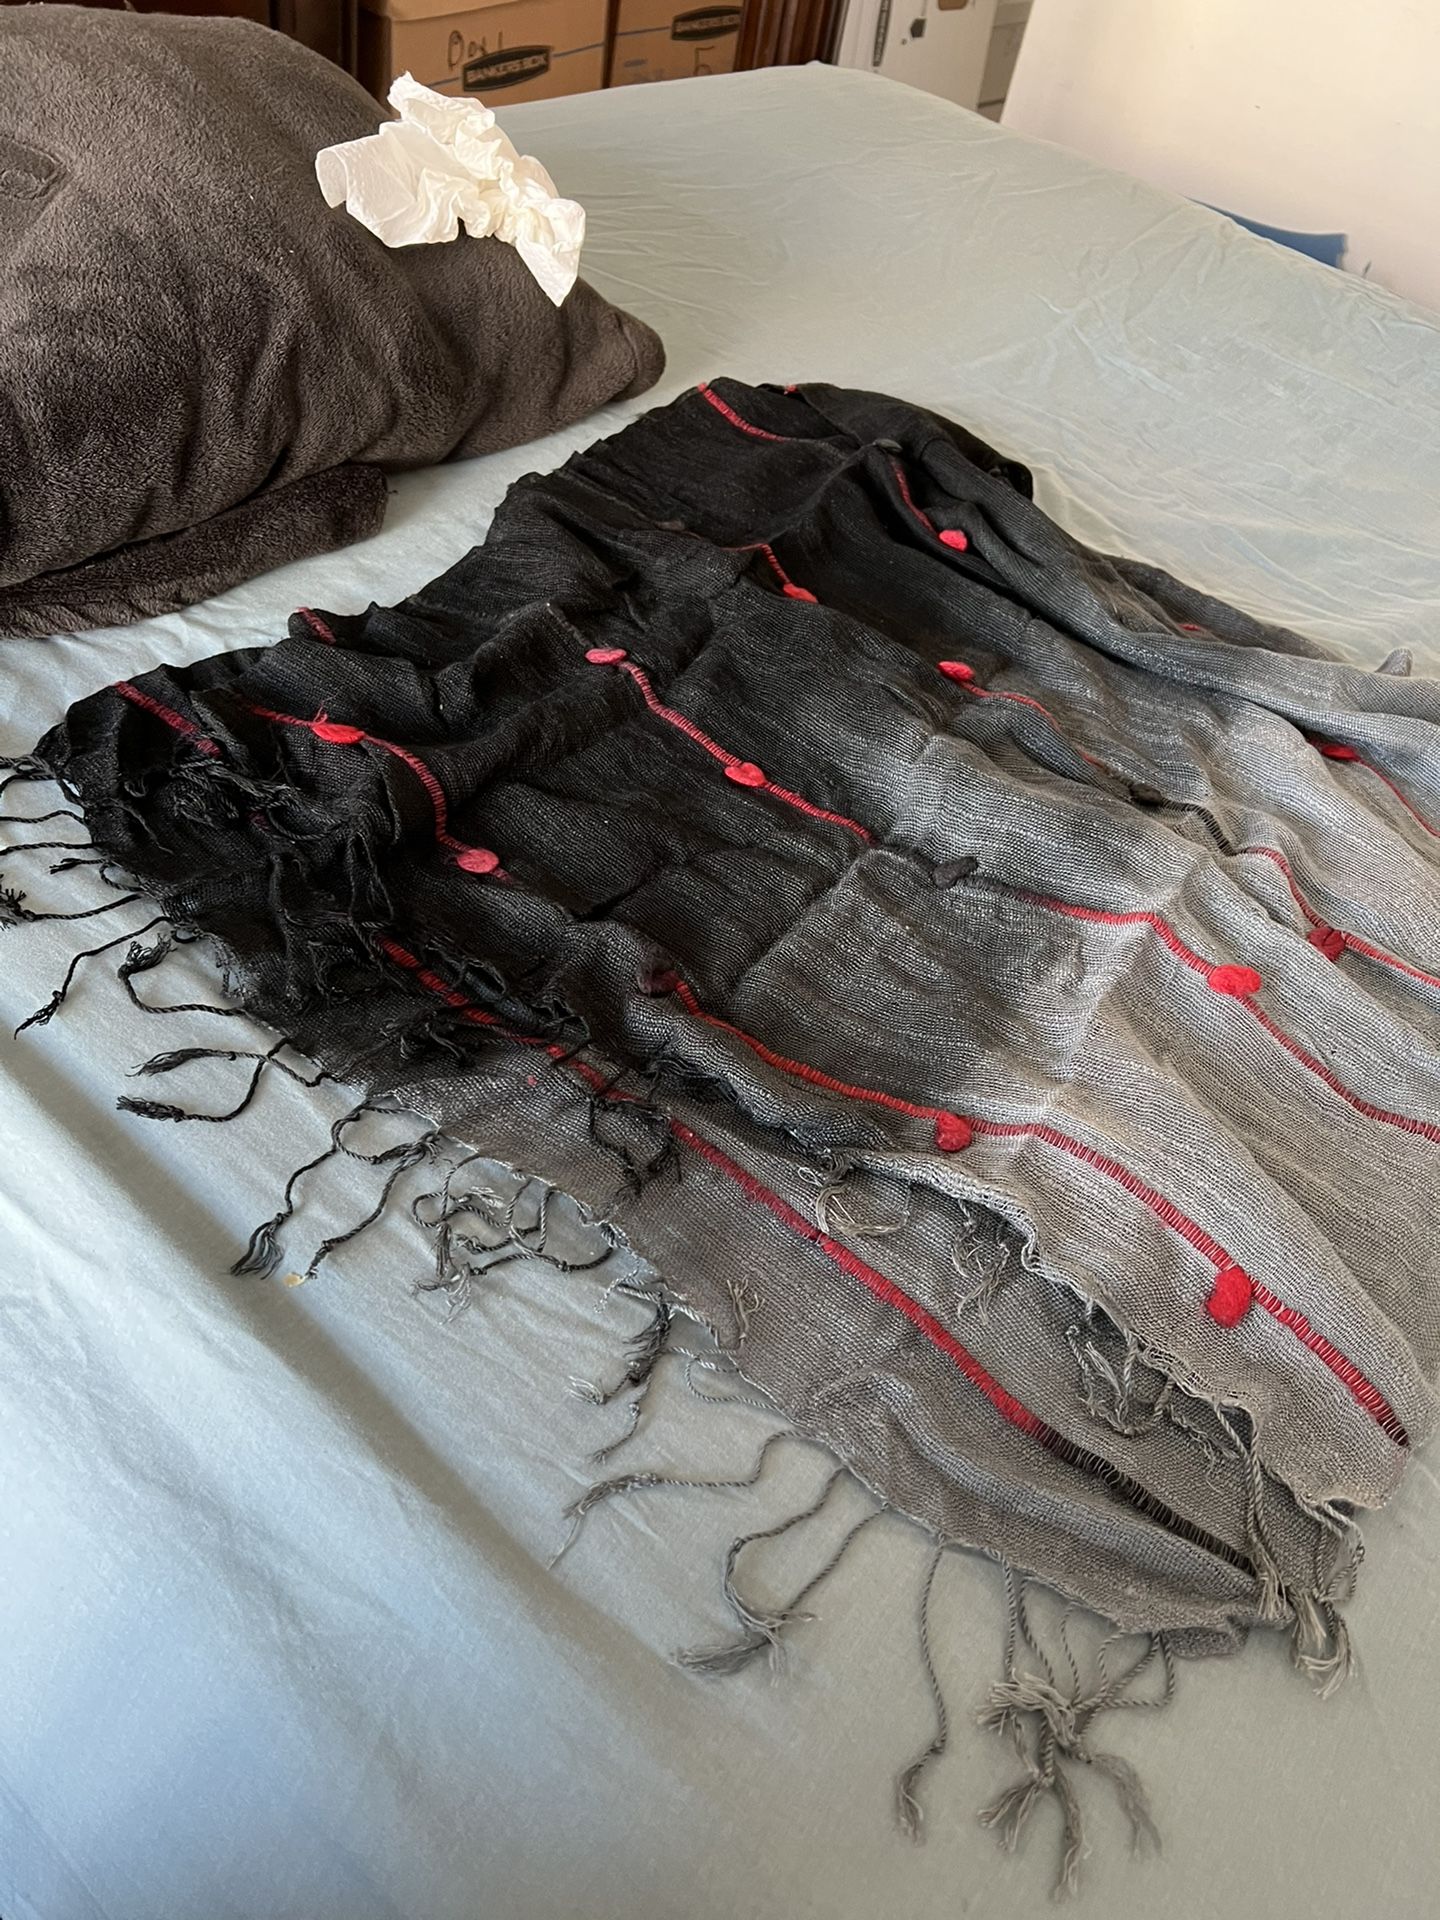 Scarf Wrap Avant Garde Ombre Style Black  with Red Knots Hanging Balls Fringe.  64” length x 20” width Has stretch weave material  Comes from a pet an